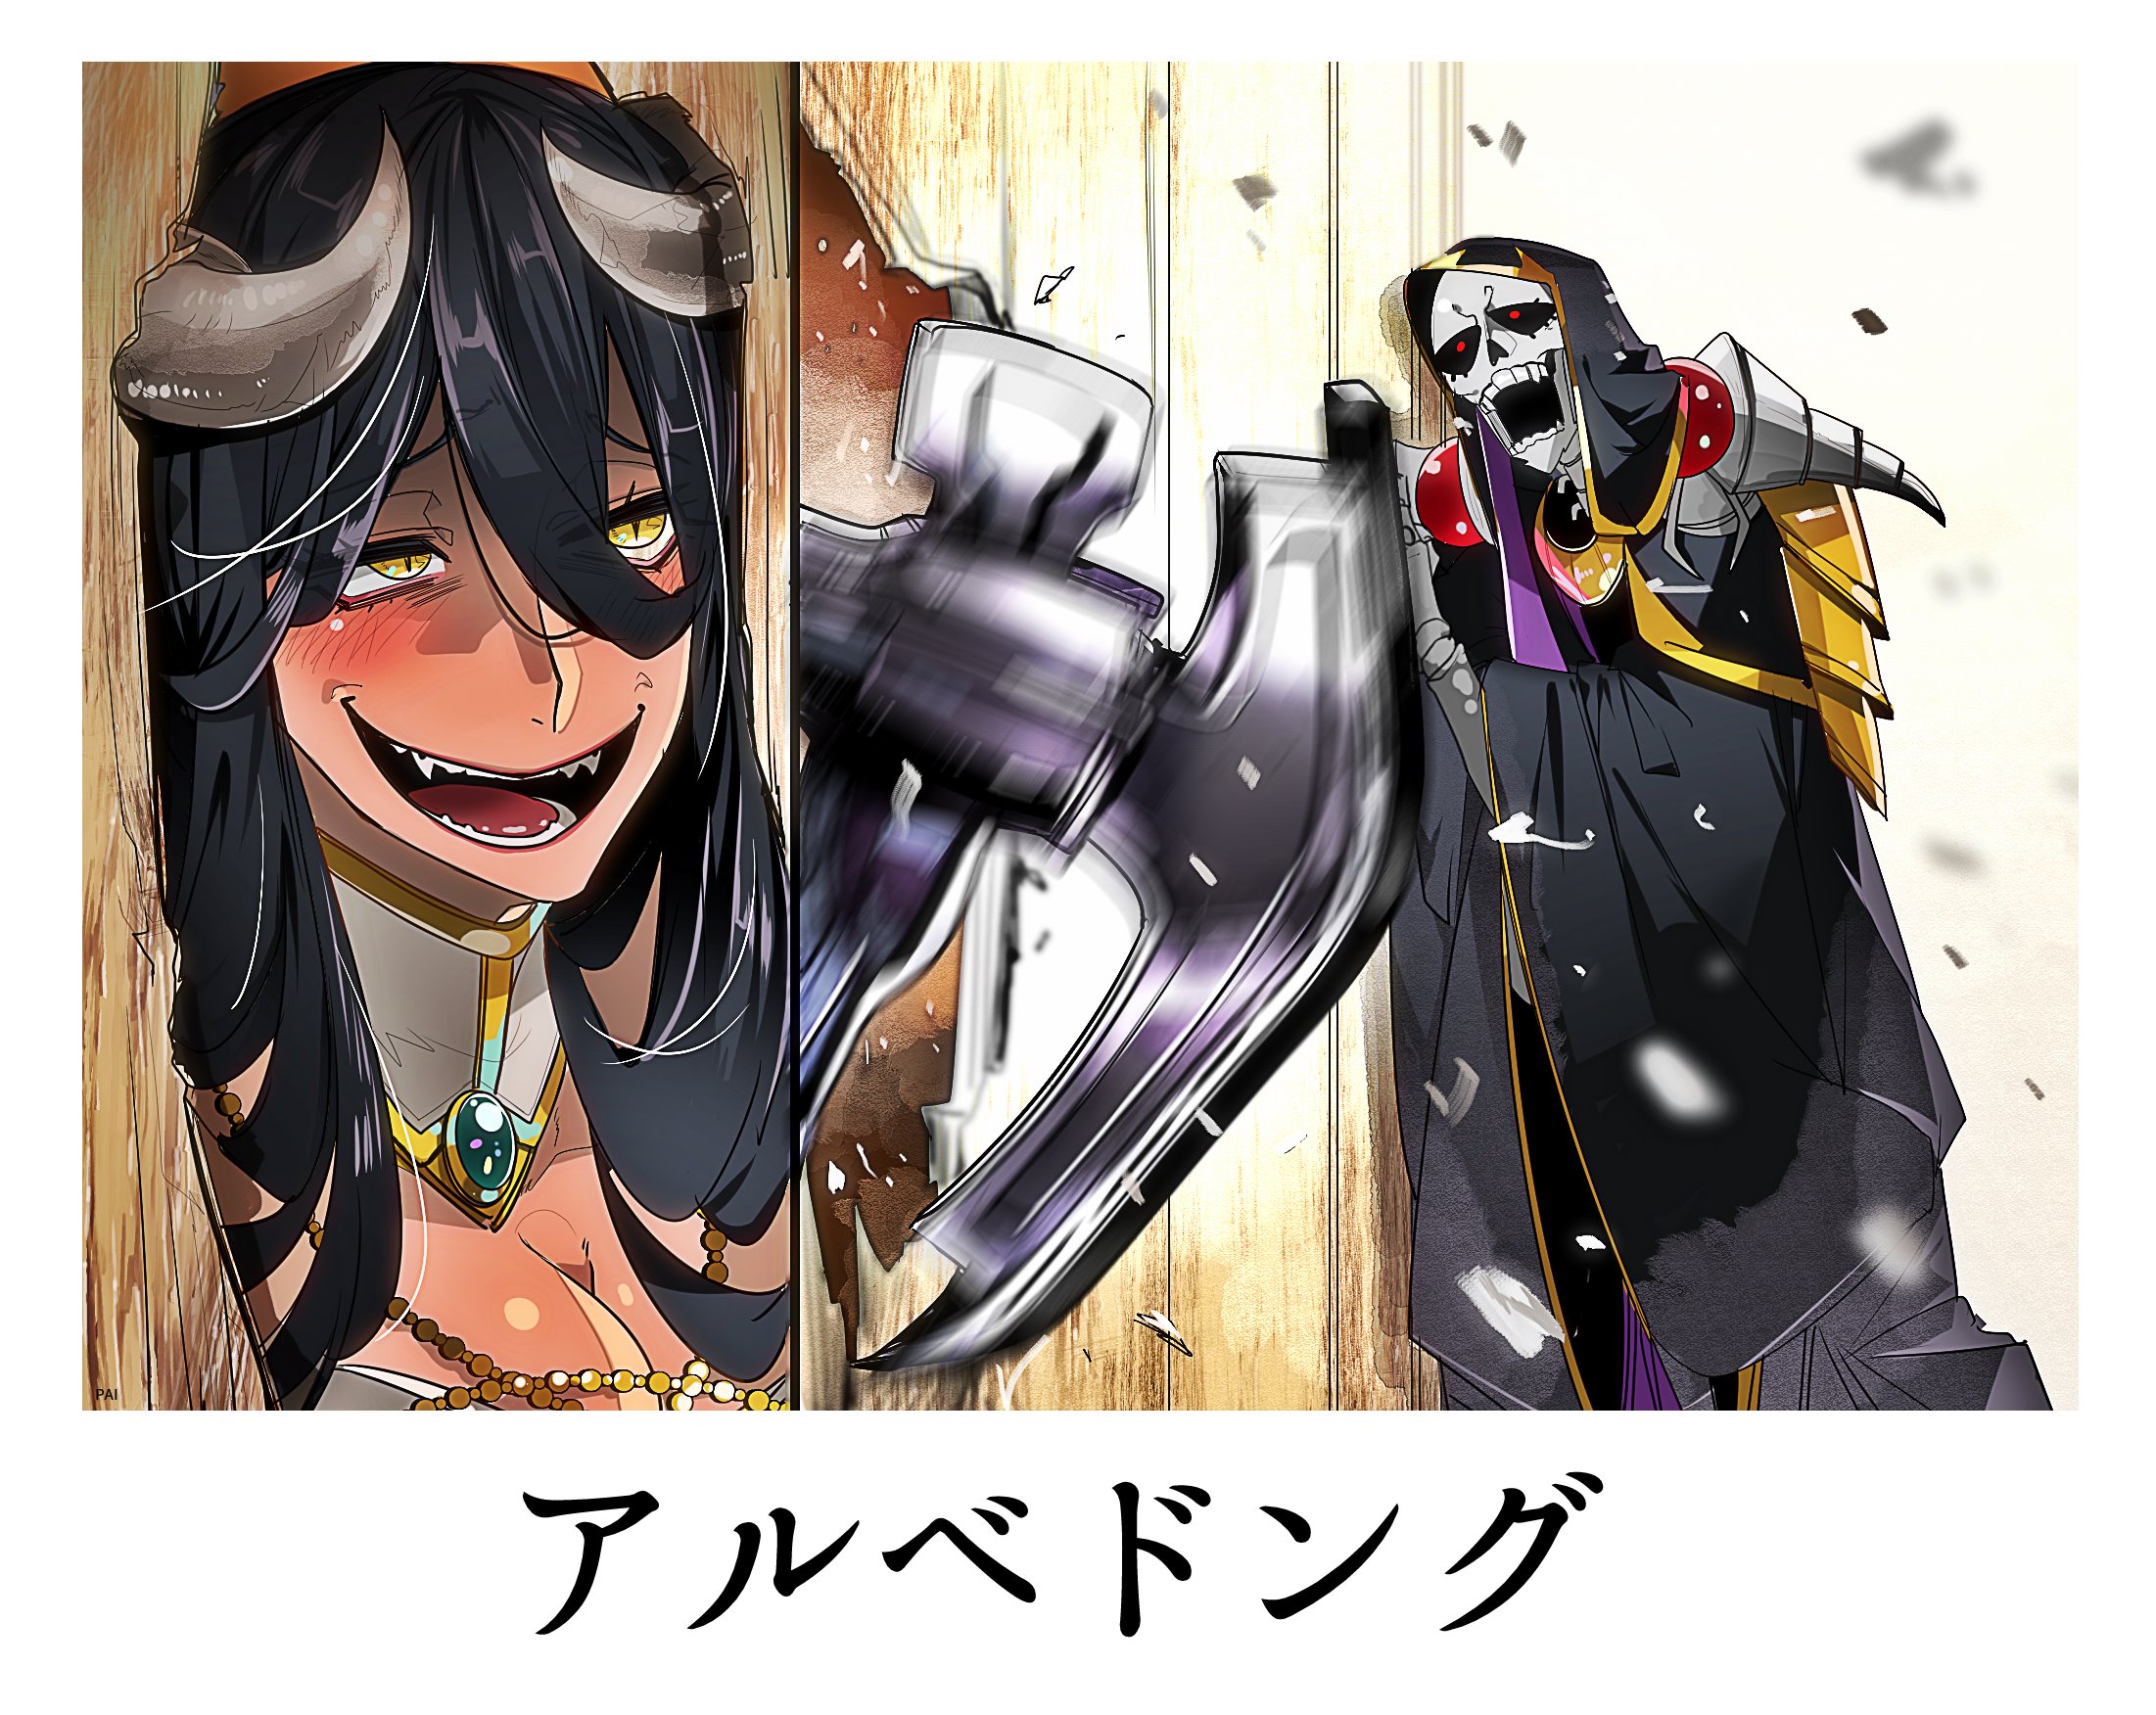 Anime 2202x1752 Overlord (anime) 2D monster girl anime girls The Shining parody big boobs no bra cleavage white dress open mouth smiling skeleton cape axes holes kanji yandere jewelry anime Albedo (OverLord) Ainz Ooal Gown ecchi bright